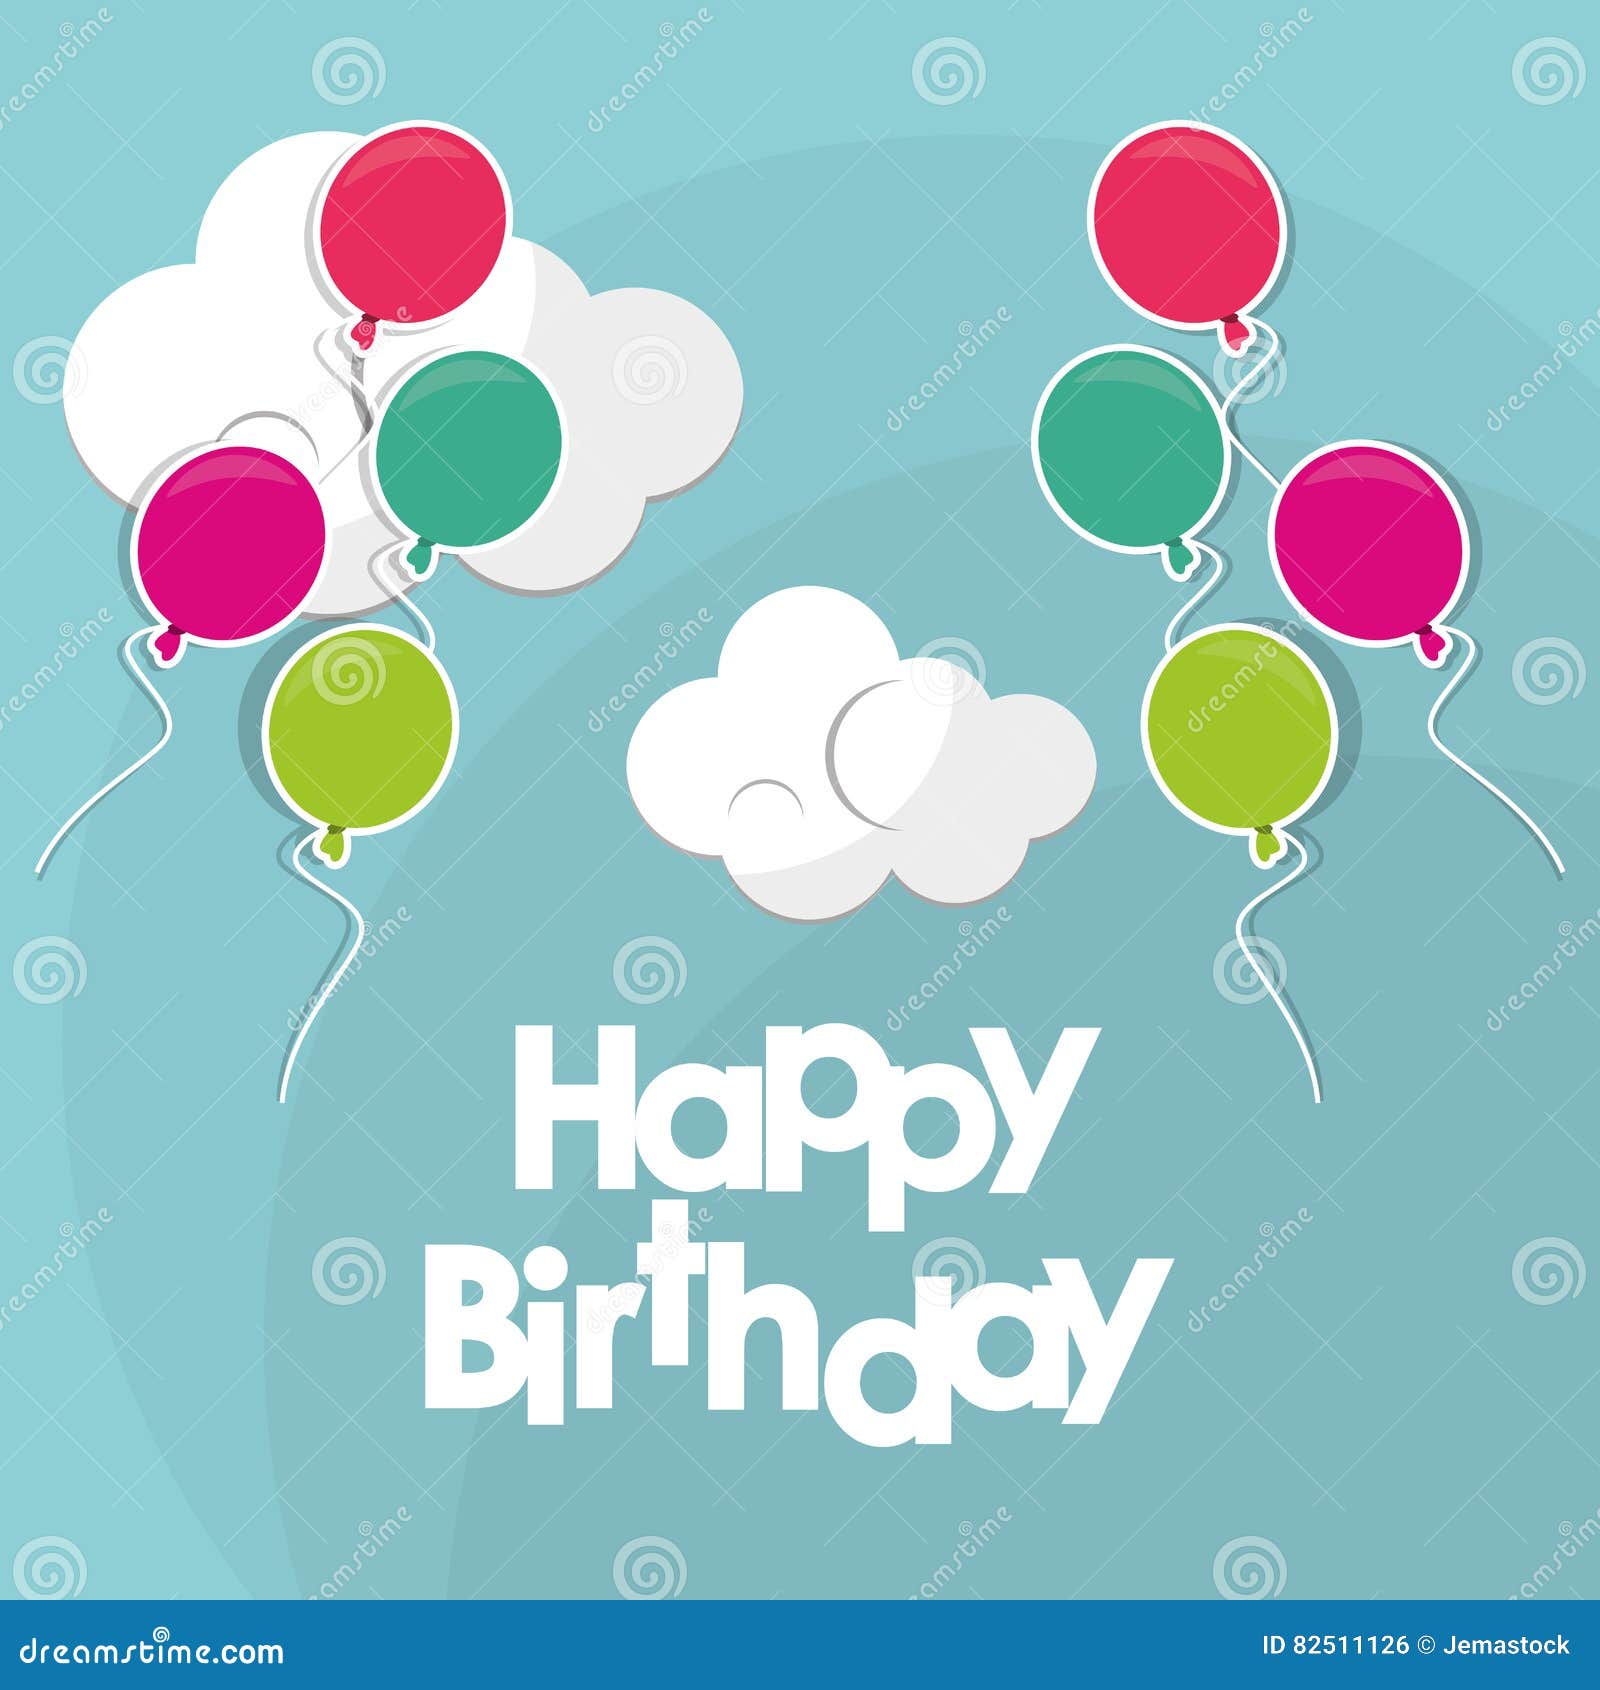 Happy Birthday Flying Balloons Clouds Stock Vector - Illustration of ...